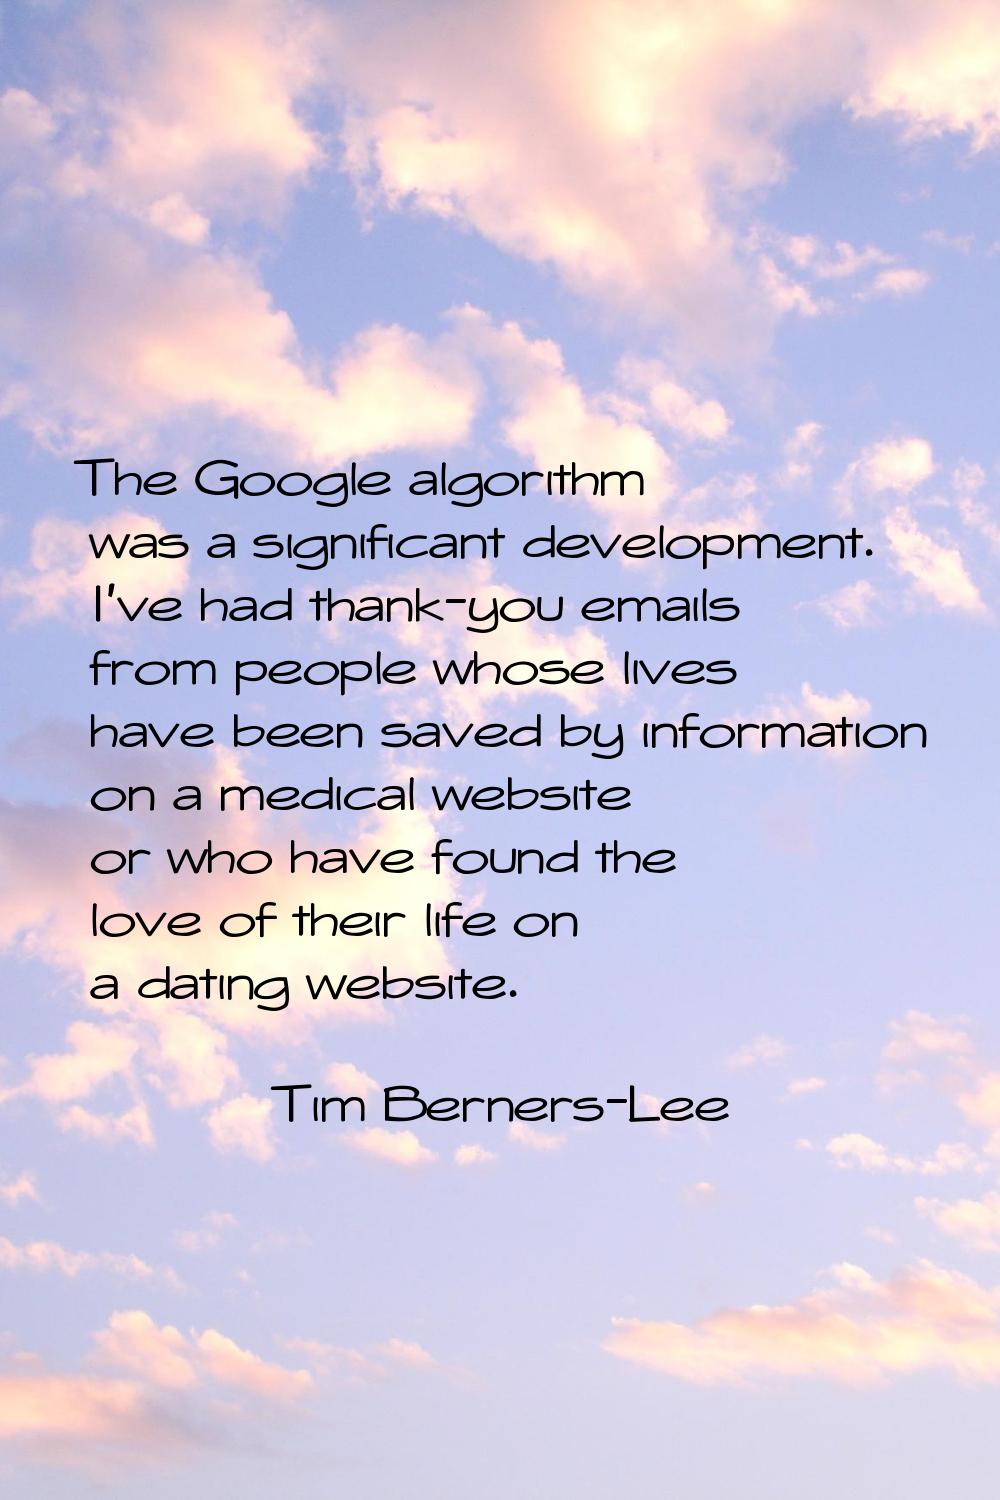 The Google algorithm was a significant development. I've had thank-you emails from people whose liv